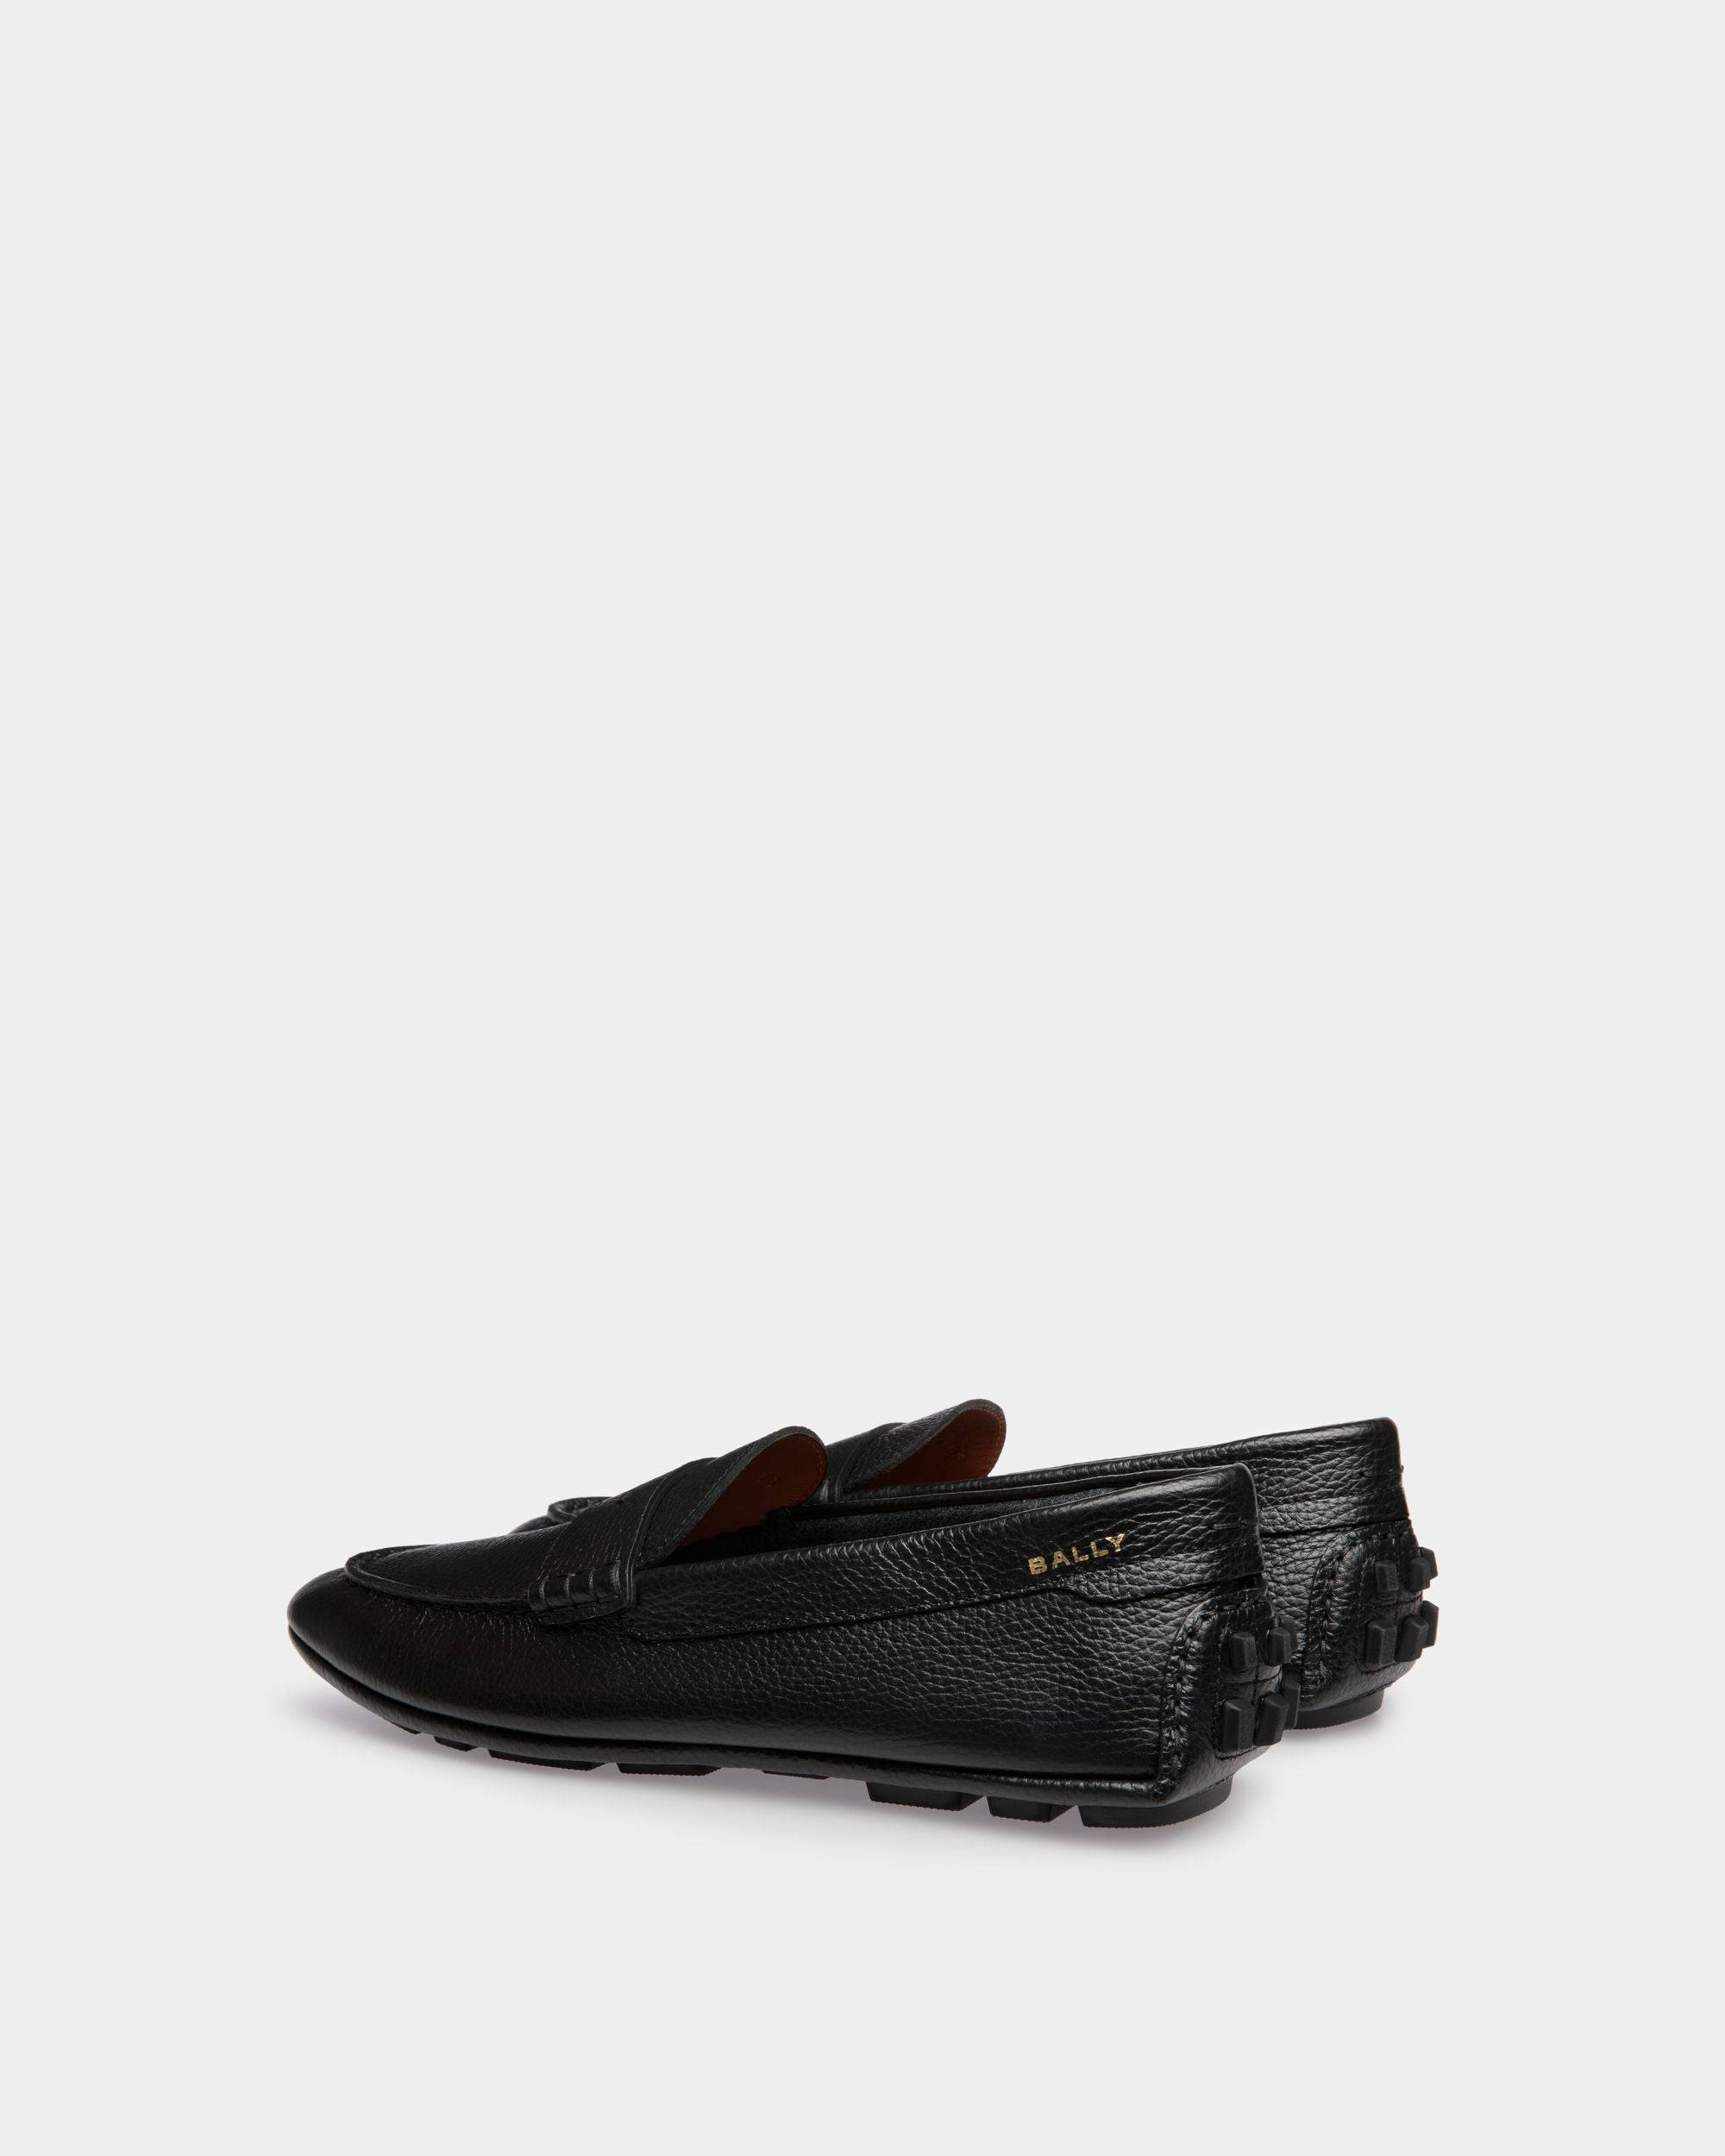 Kerbs | Men's Driver in Black Grained Leather | Bally | Still Life 3/4 Back